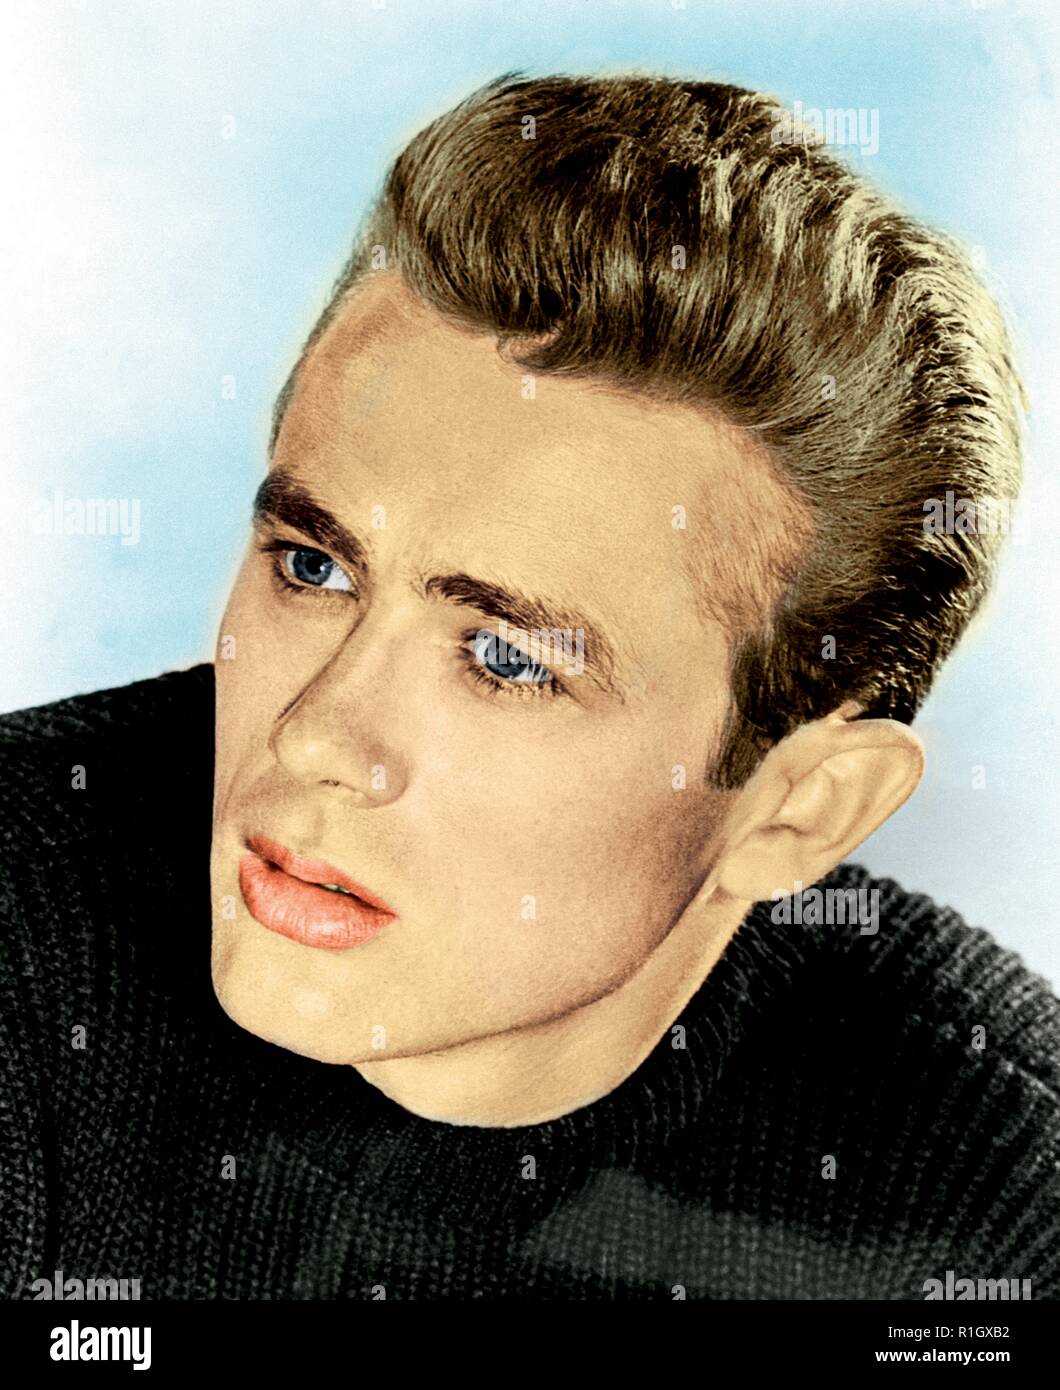 James Byron Dean (February 8, 1931 – September 30, 1955) was an American actor. He is remembered as a cultural icon of teenage disillusionment and social estrangement, as expressed in the title of his most celebrated film, Rebel Without a Cause (1955), in which he starred as troubled teenager Jim Stark. The other two roles that defined his stardom were loner Cal Trask in East of Eden (1955) and surly ranch hand Jett Rink in Giant (1956). Credit: Hollywood Photo Archive / MediaPunch Stock Photo